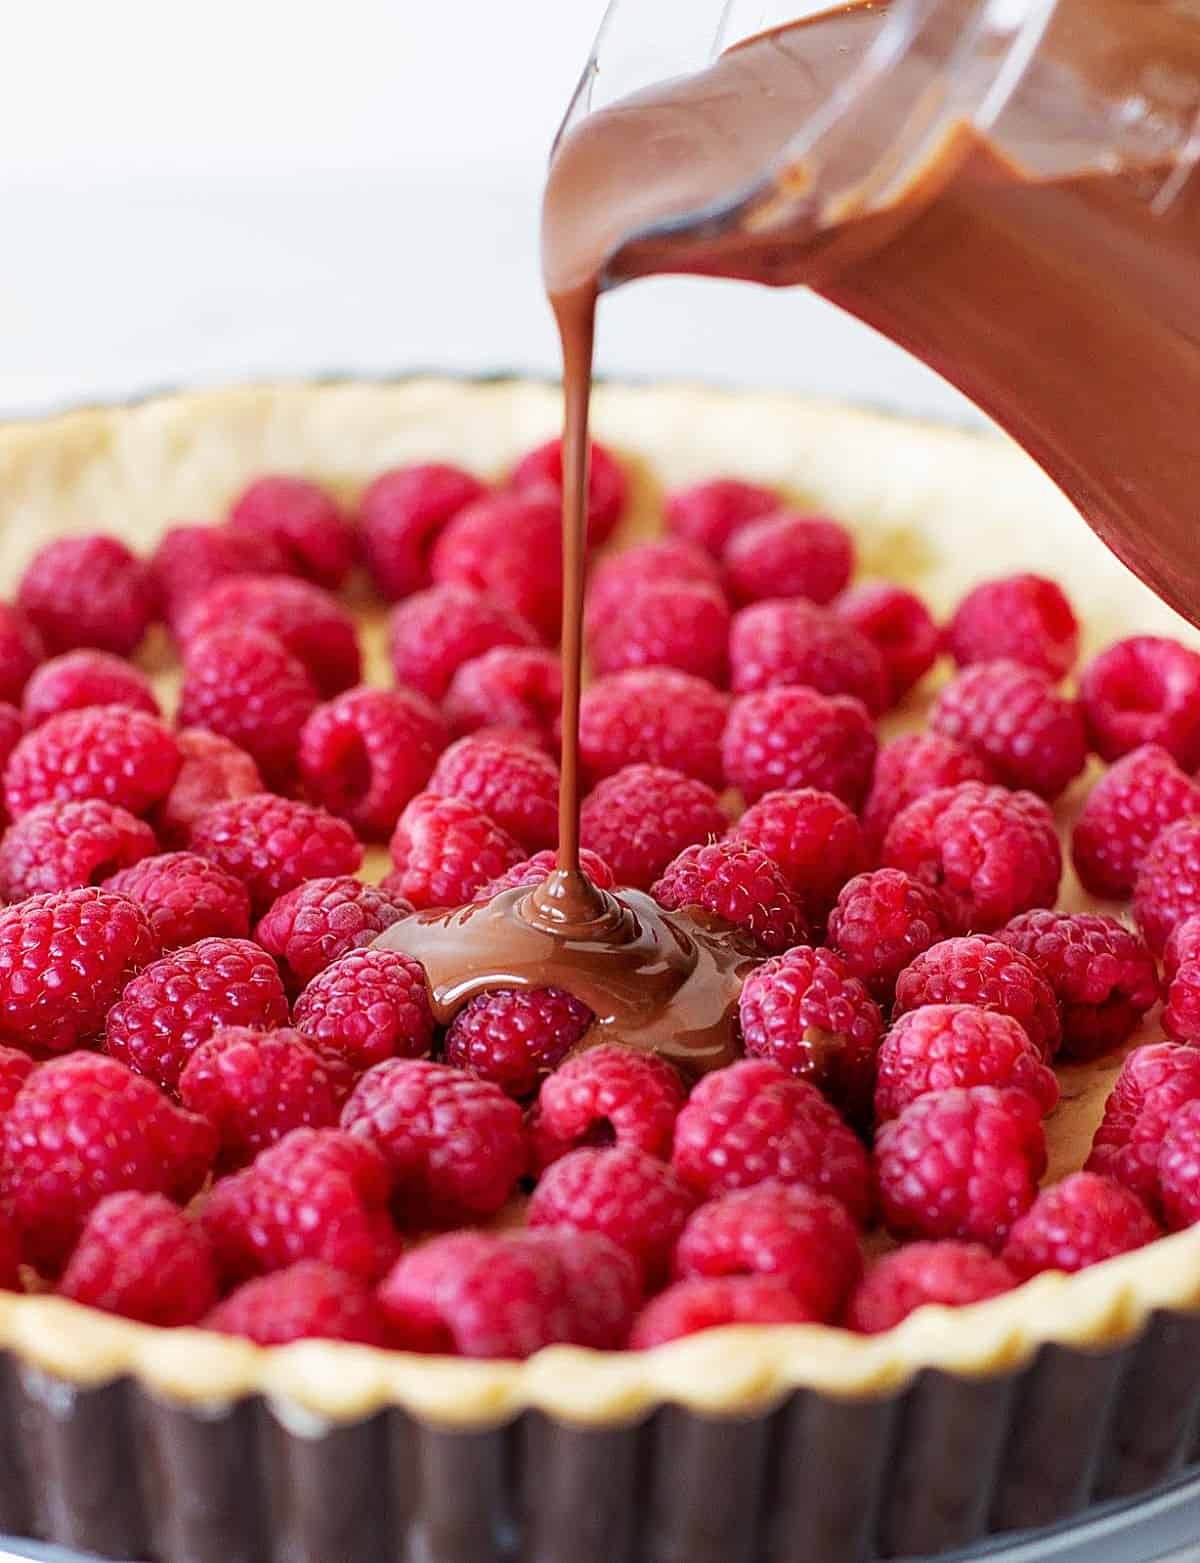 Pouring chocolate filling onto tart crust filled with fresh raspberries.